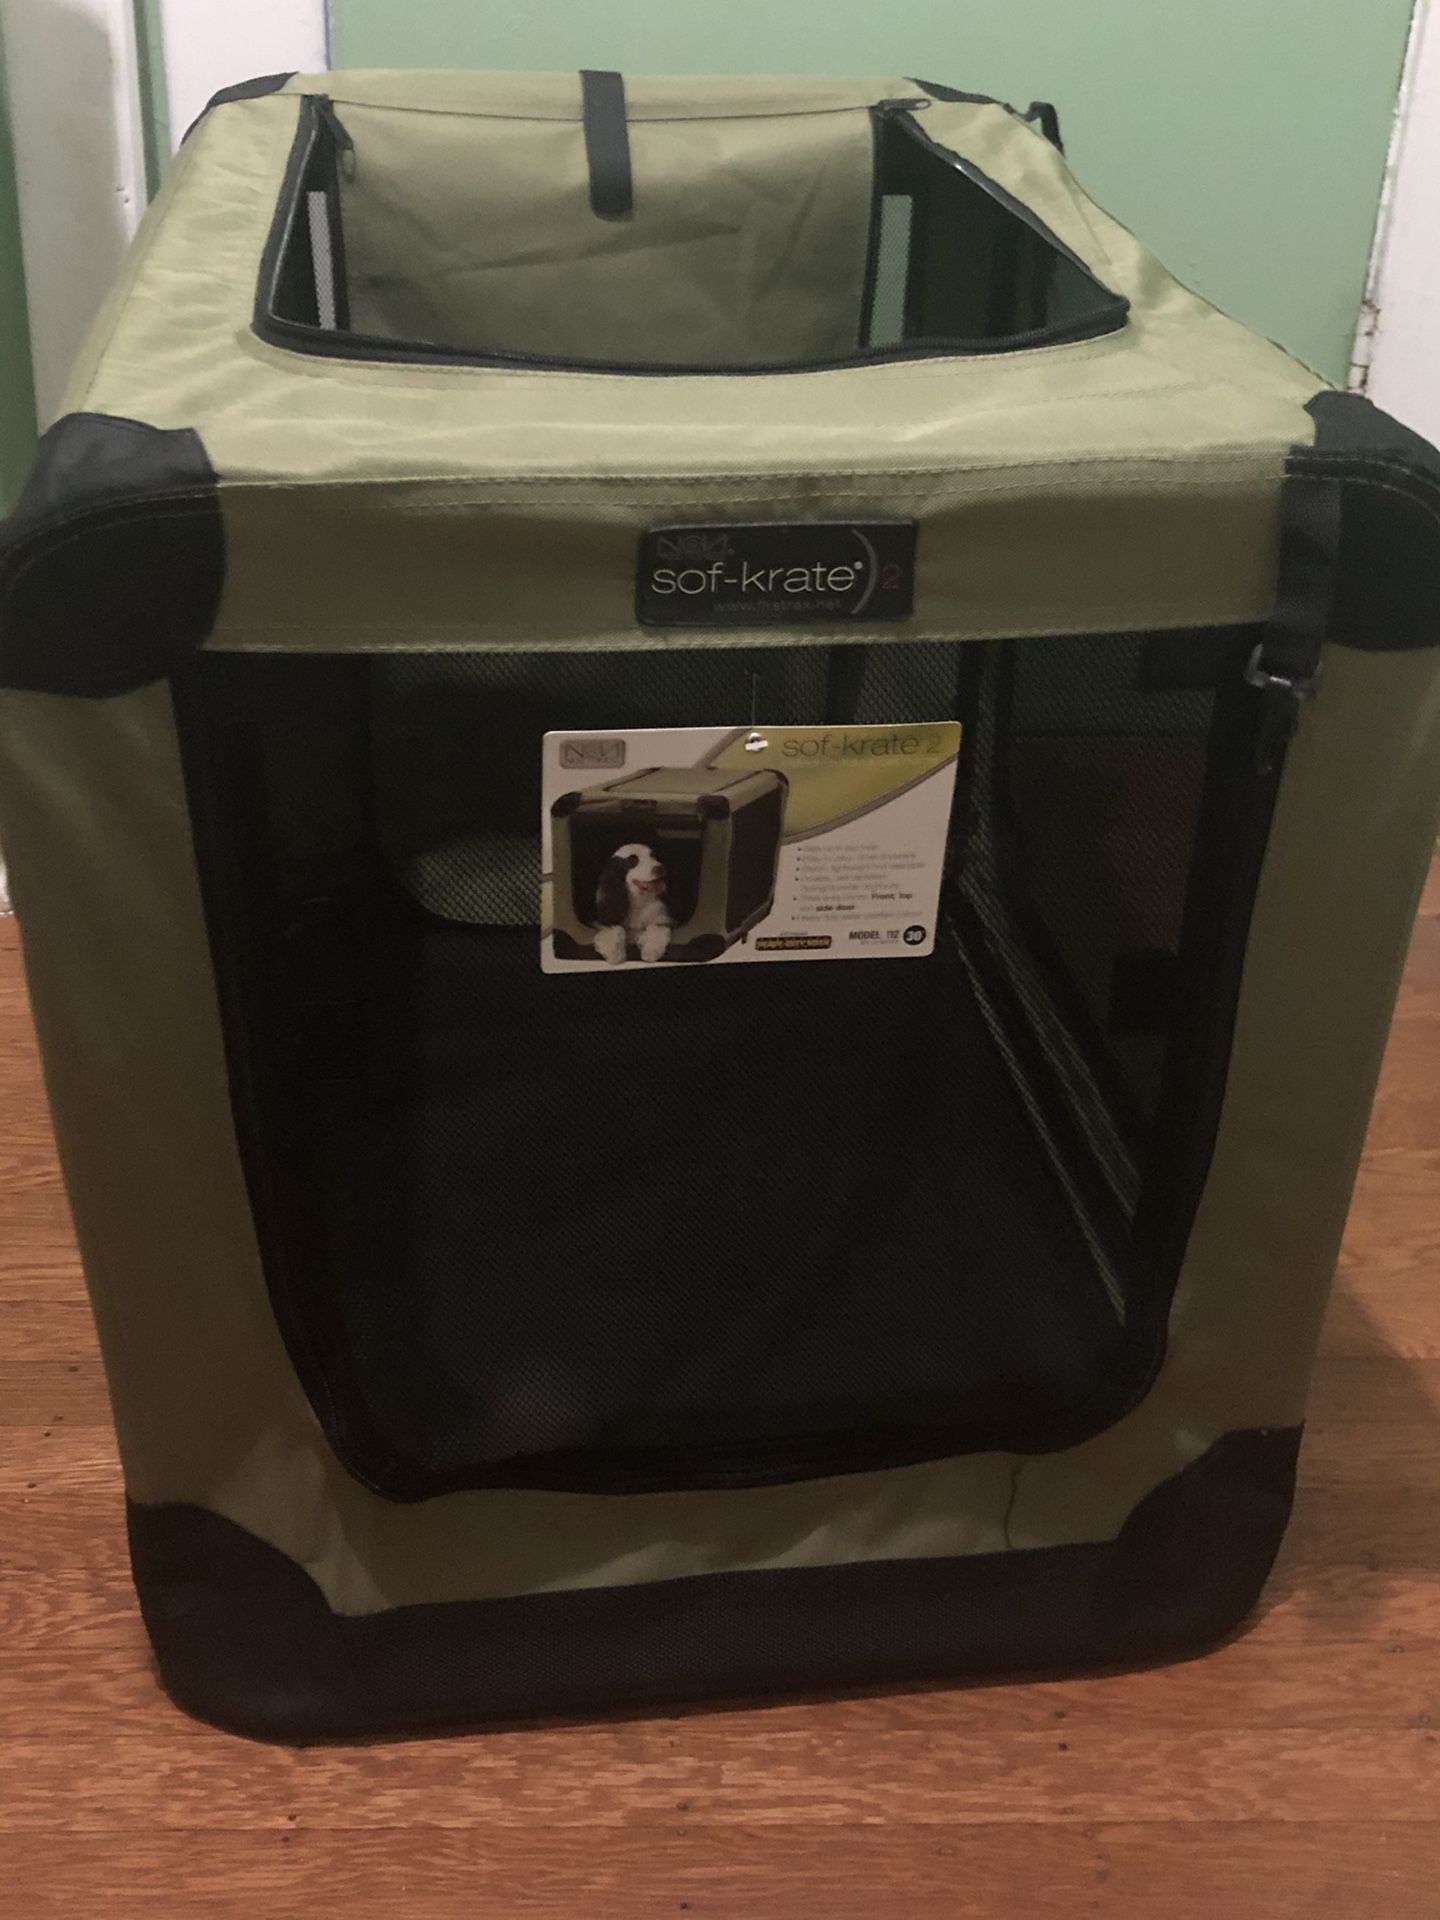 Sof-krate 2 pet carrier/portable doghouse.